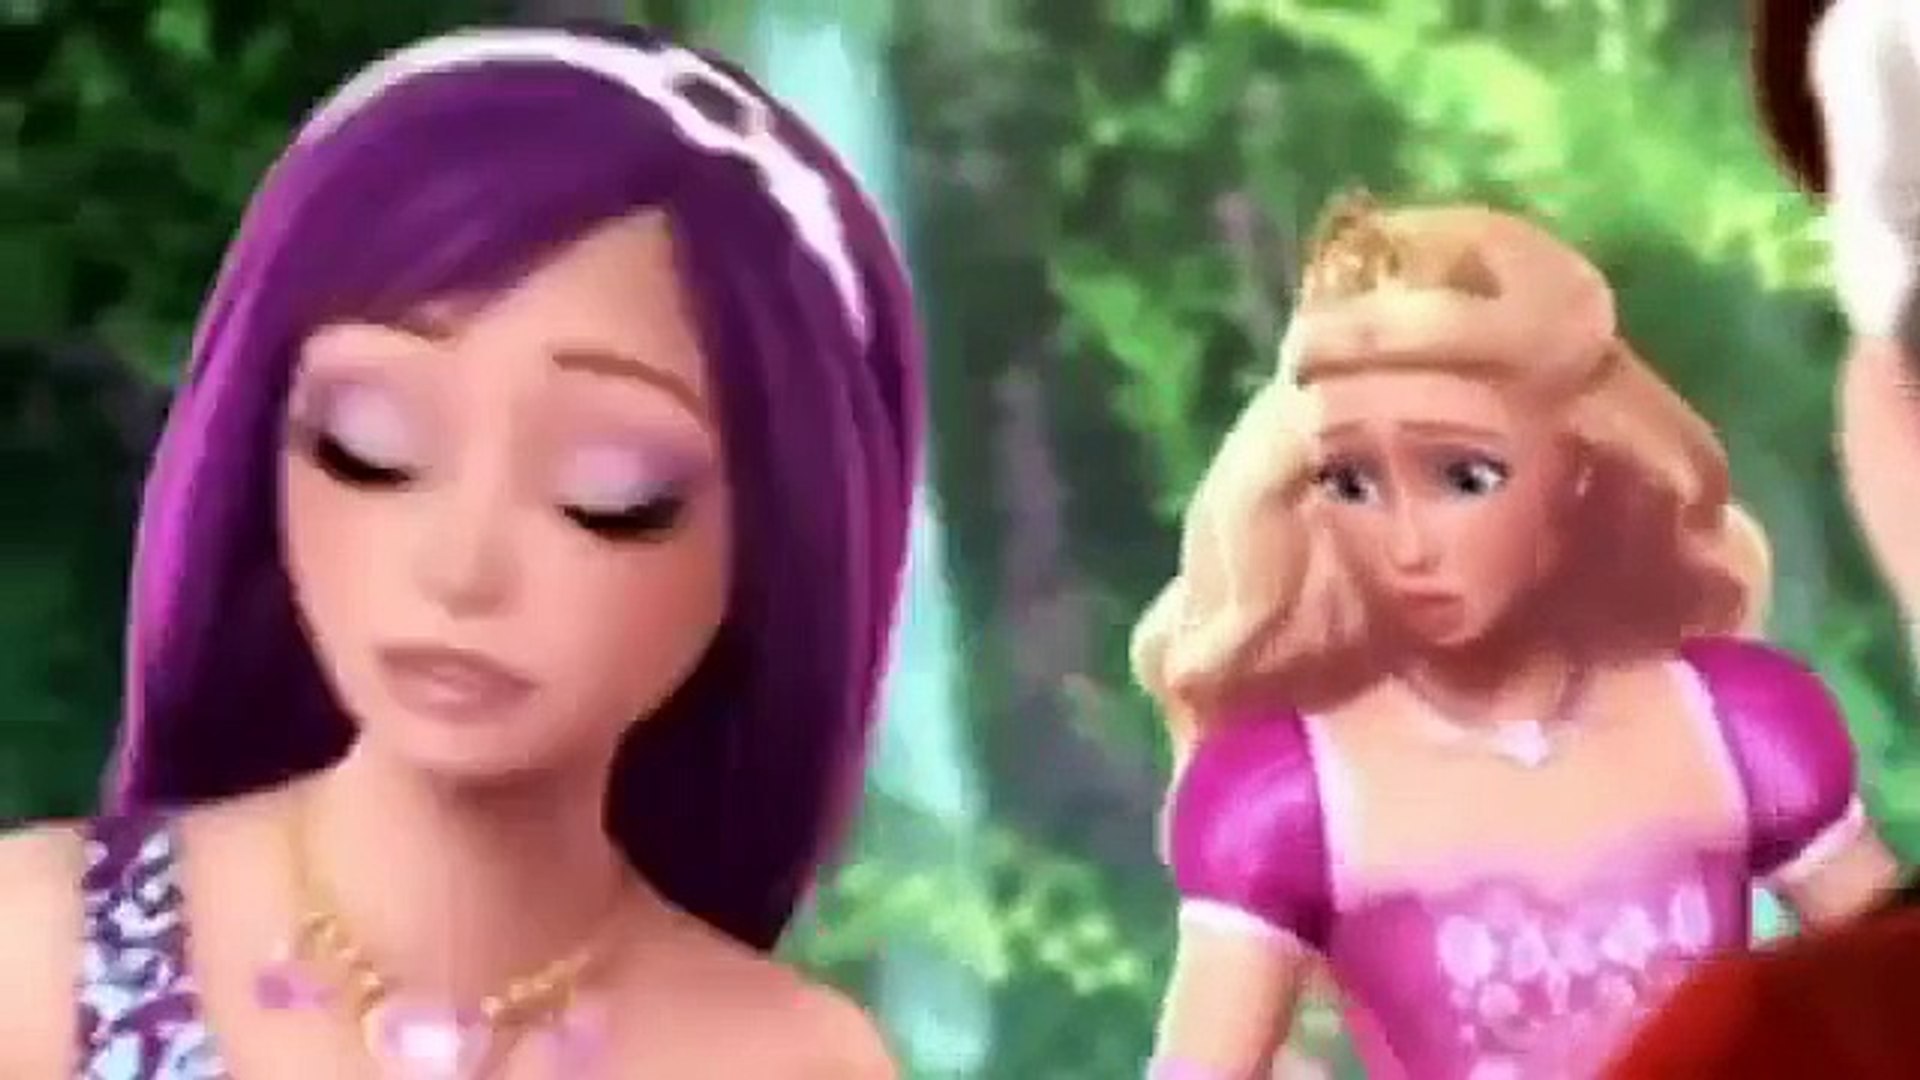 Barbie Movies full Movies In English Animation Movies 2015 English Cartoons Movies For Kids